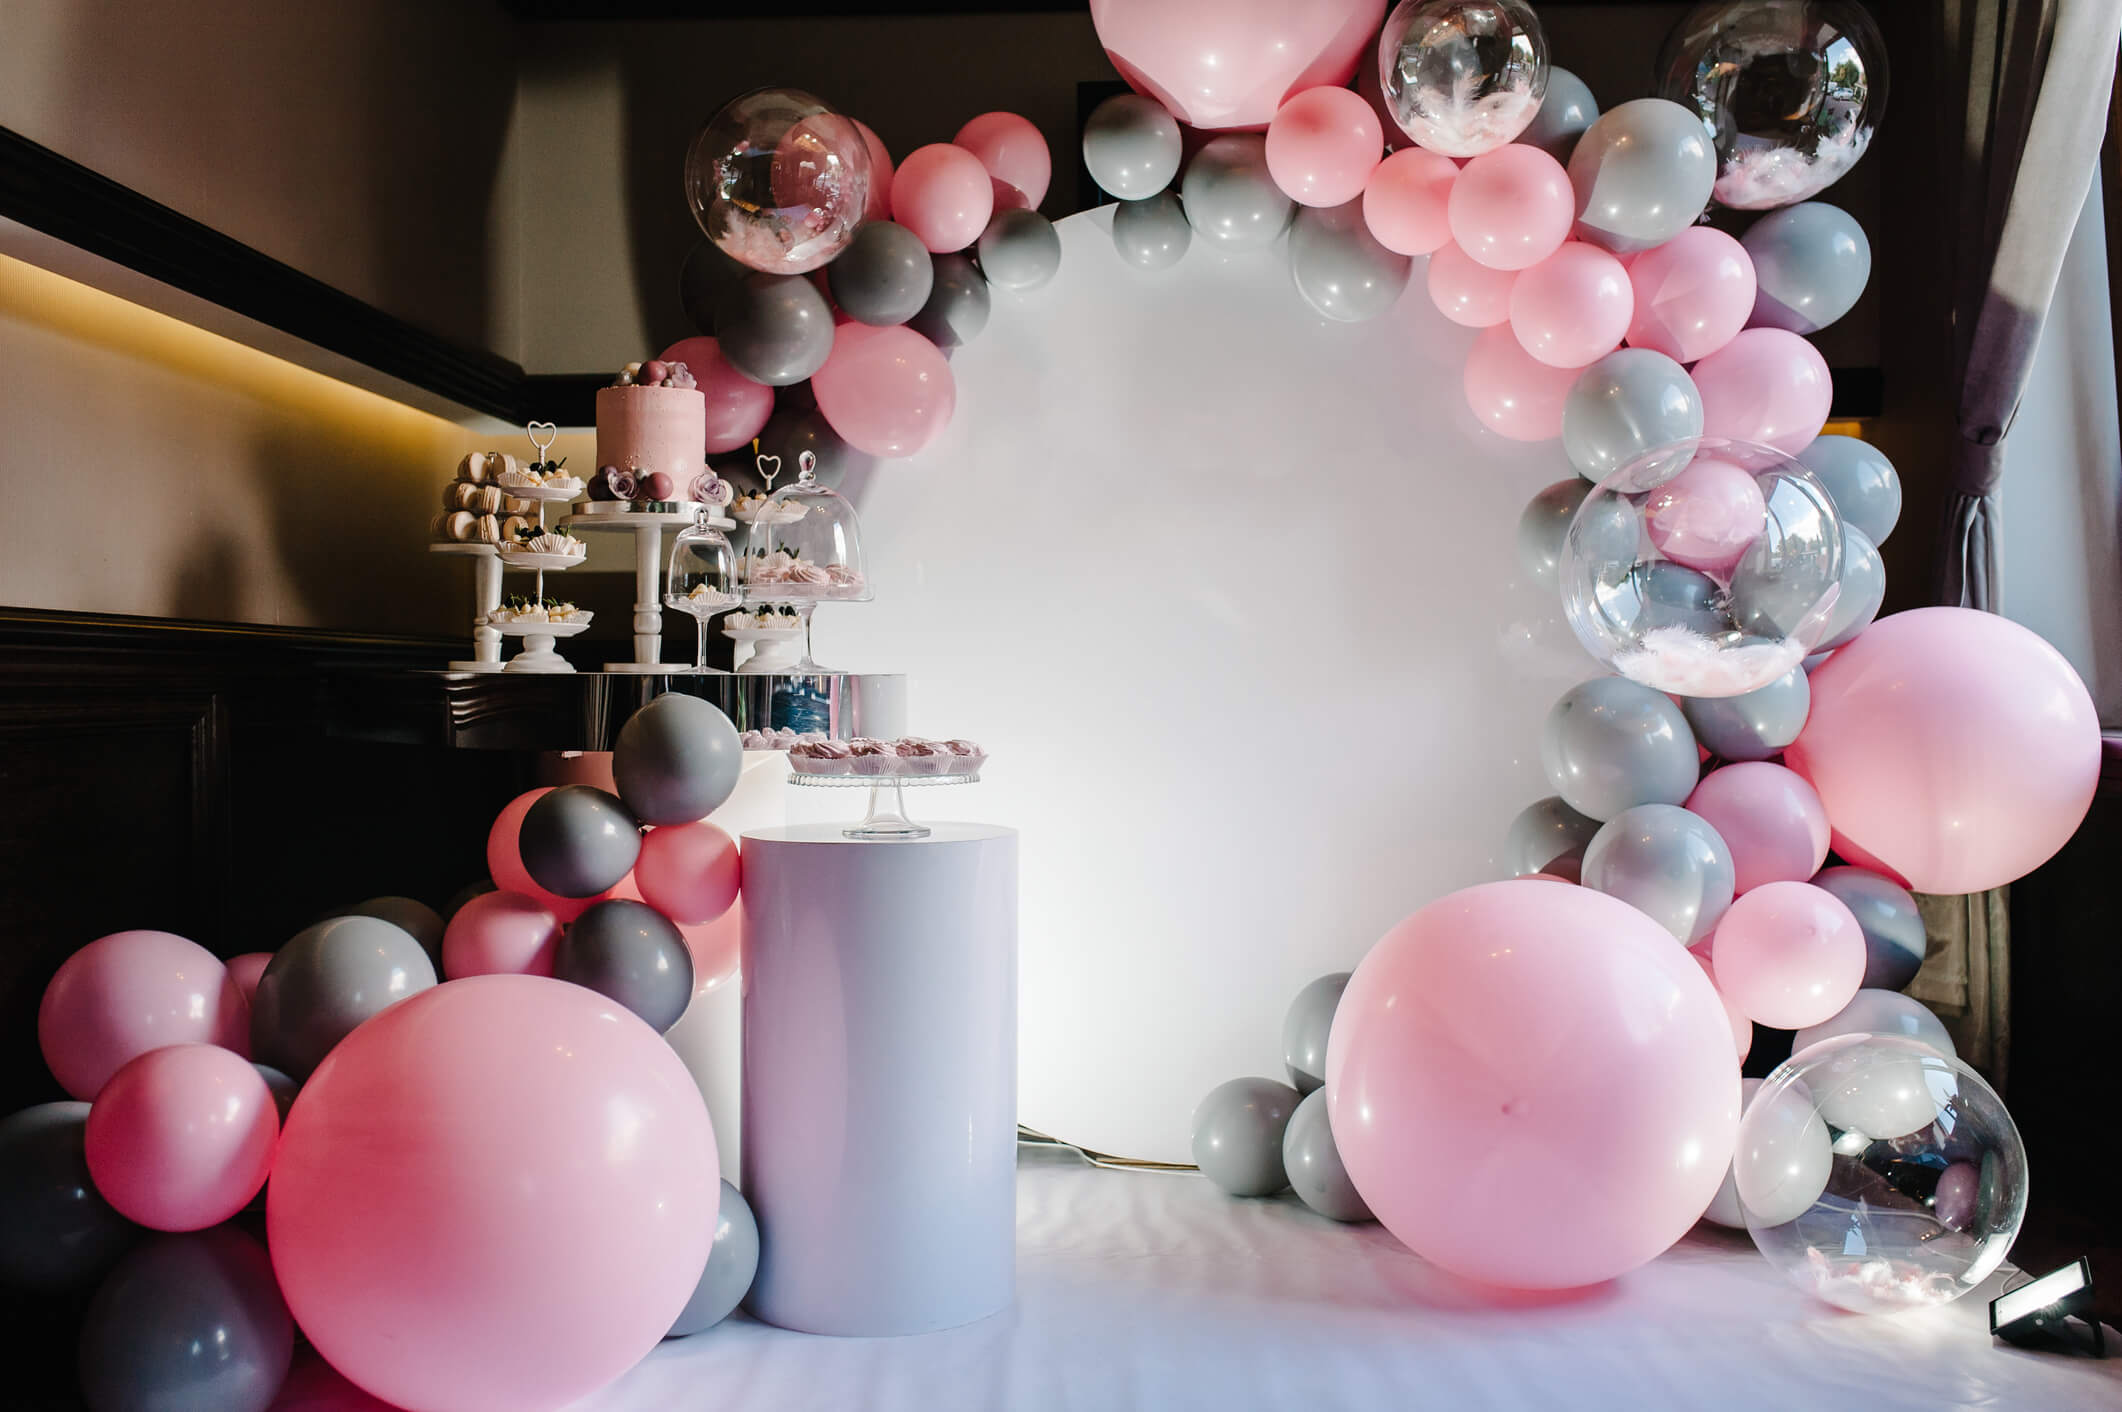 Up, Up and Away - Elegant Window Displays Using Balloons - Part 2 